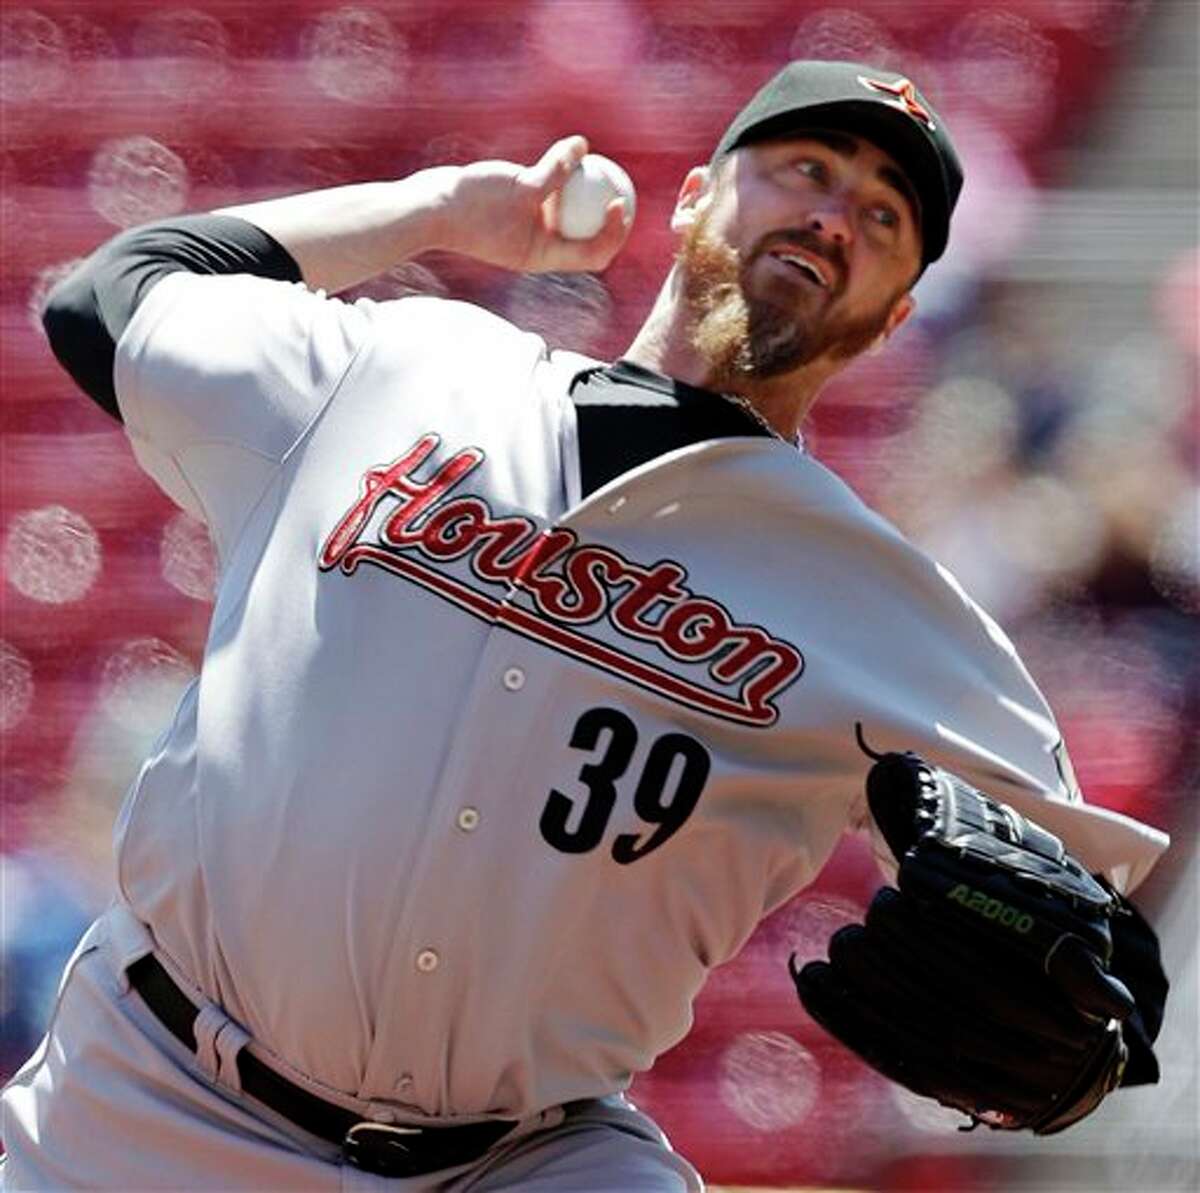 Astros starting pitcher Brett Myers throws against the Reds in the first inning on Thursday in Cincinnati.  AL BEHRMAN/ASSOCIATED PRESS